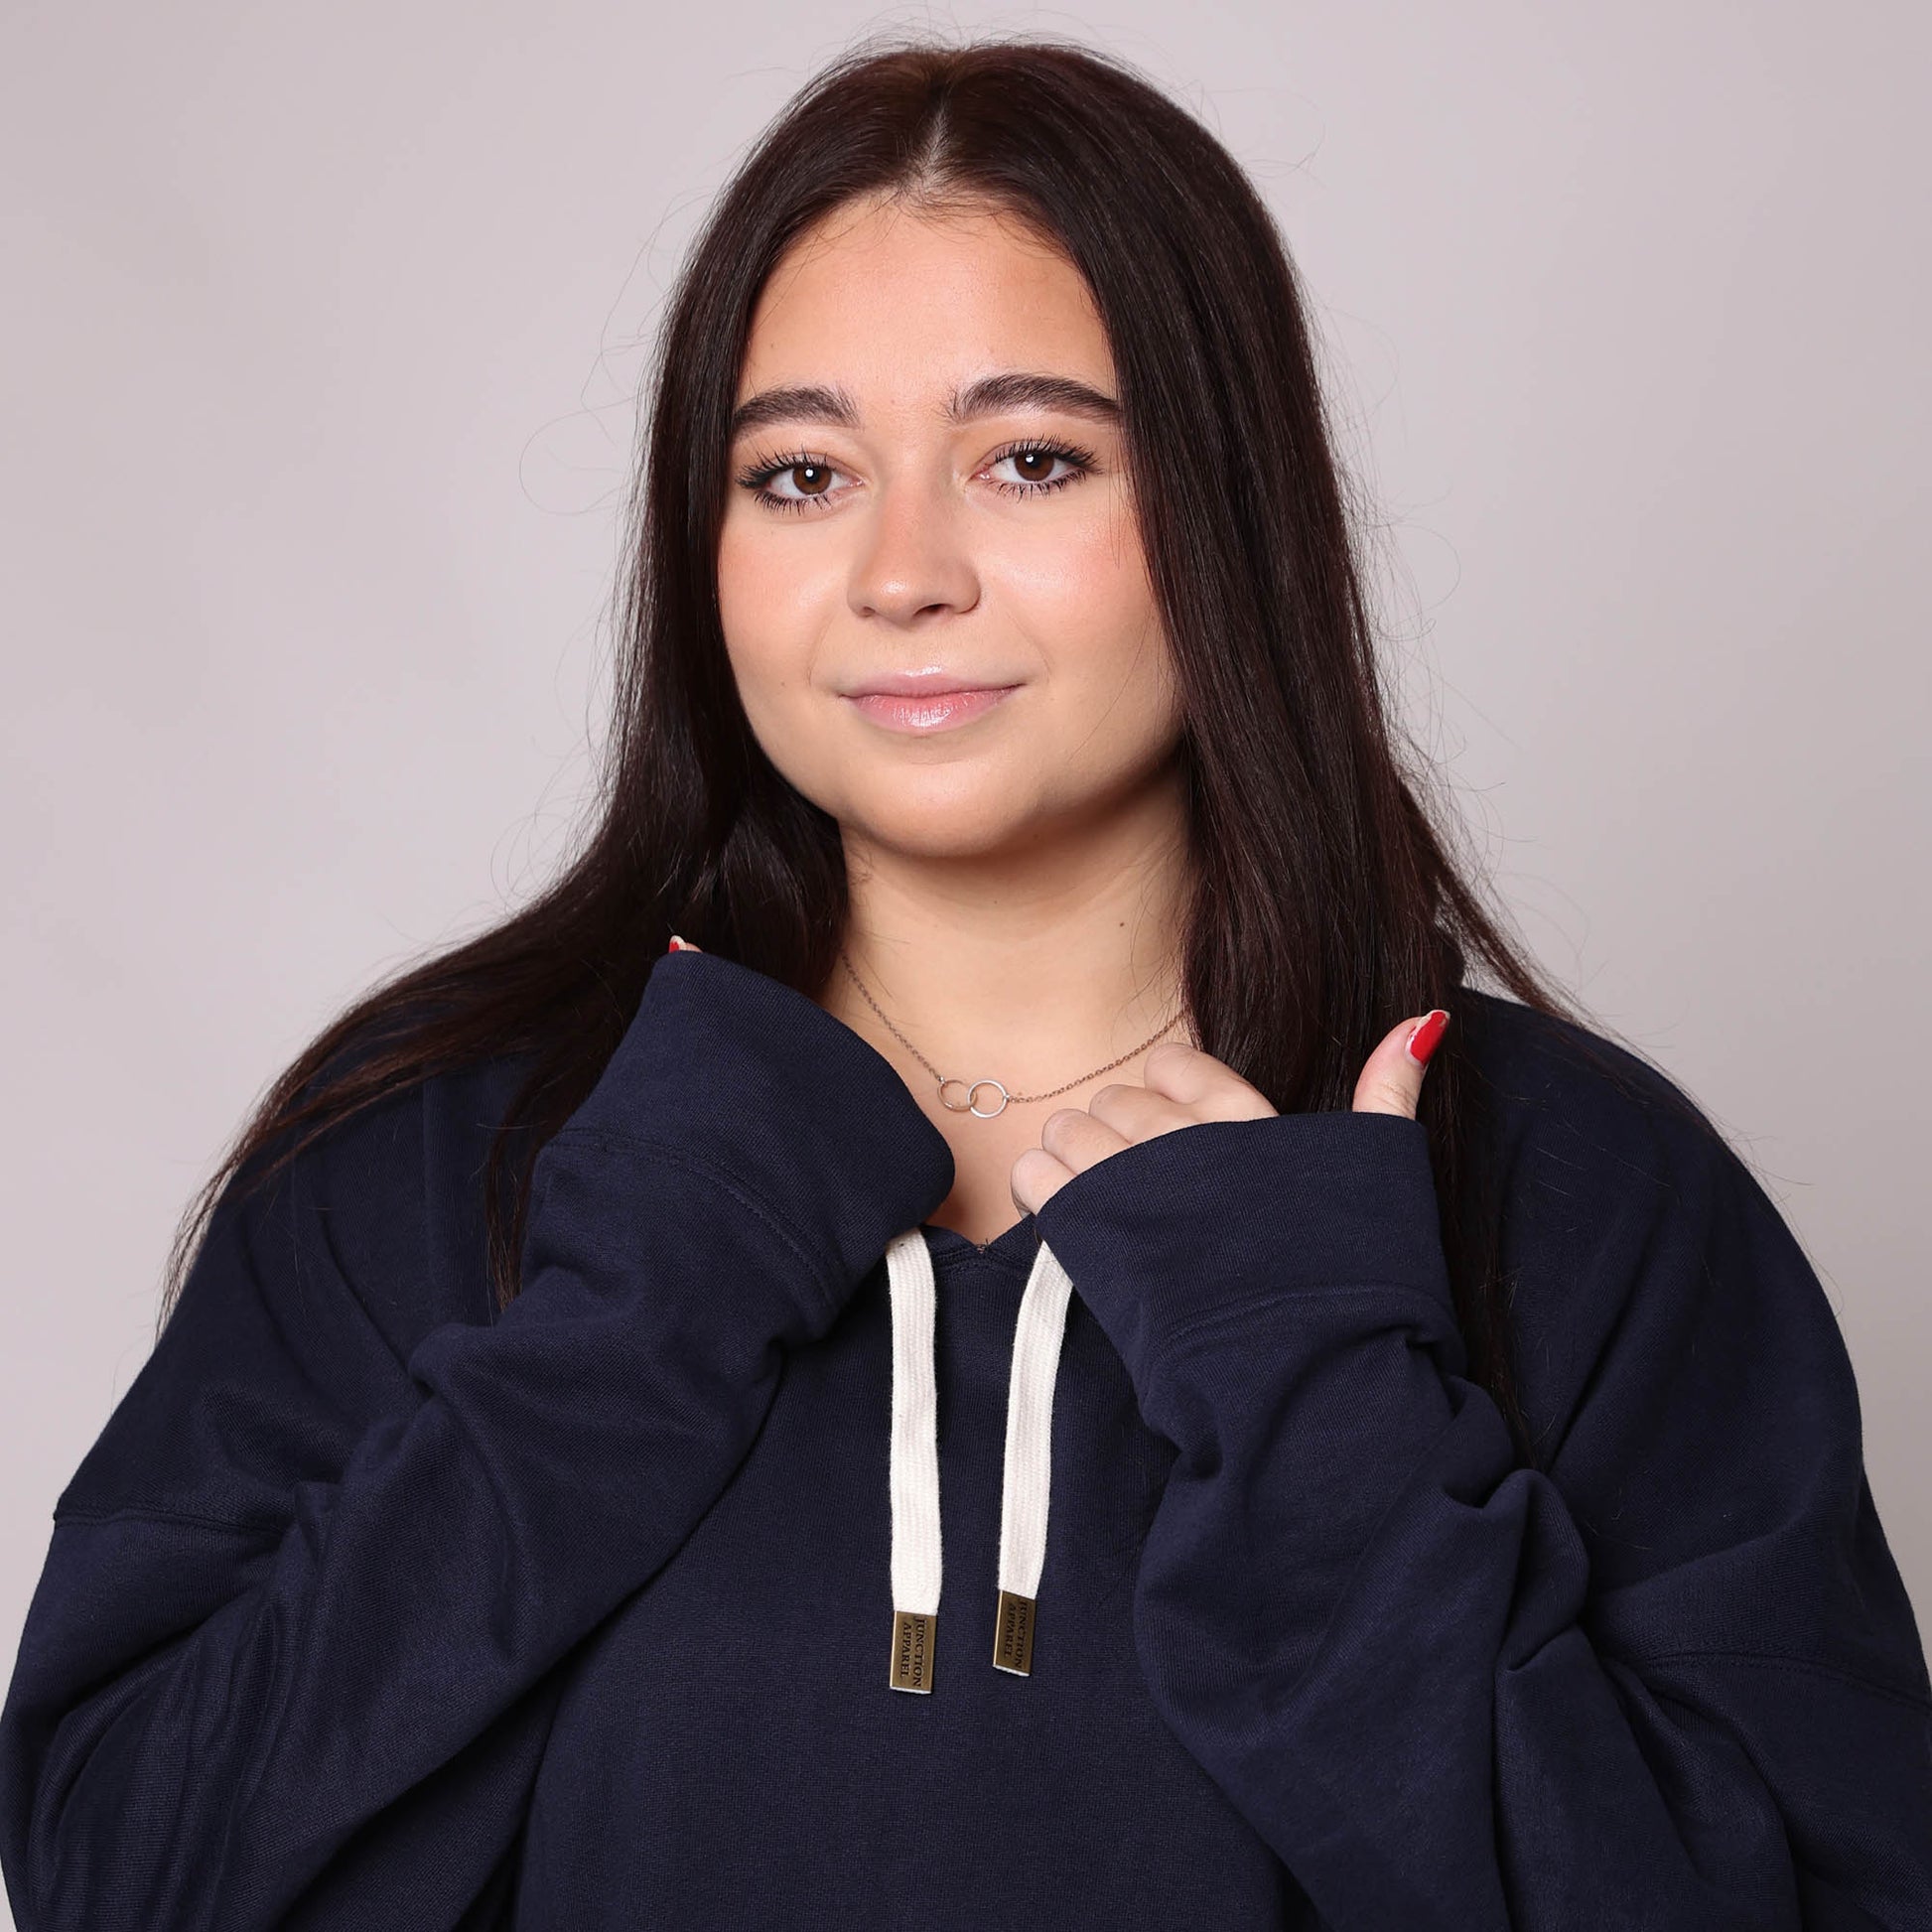 Oversized giant hoodie made from organic cotton